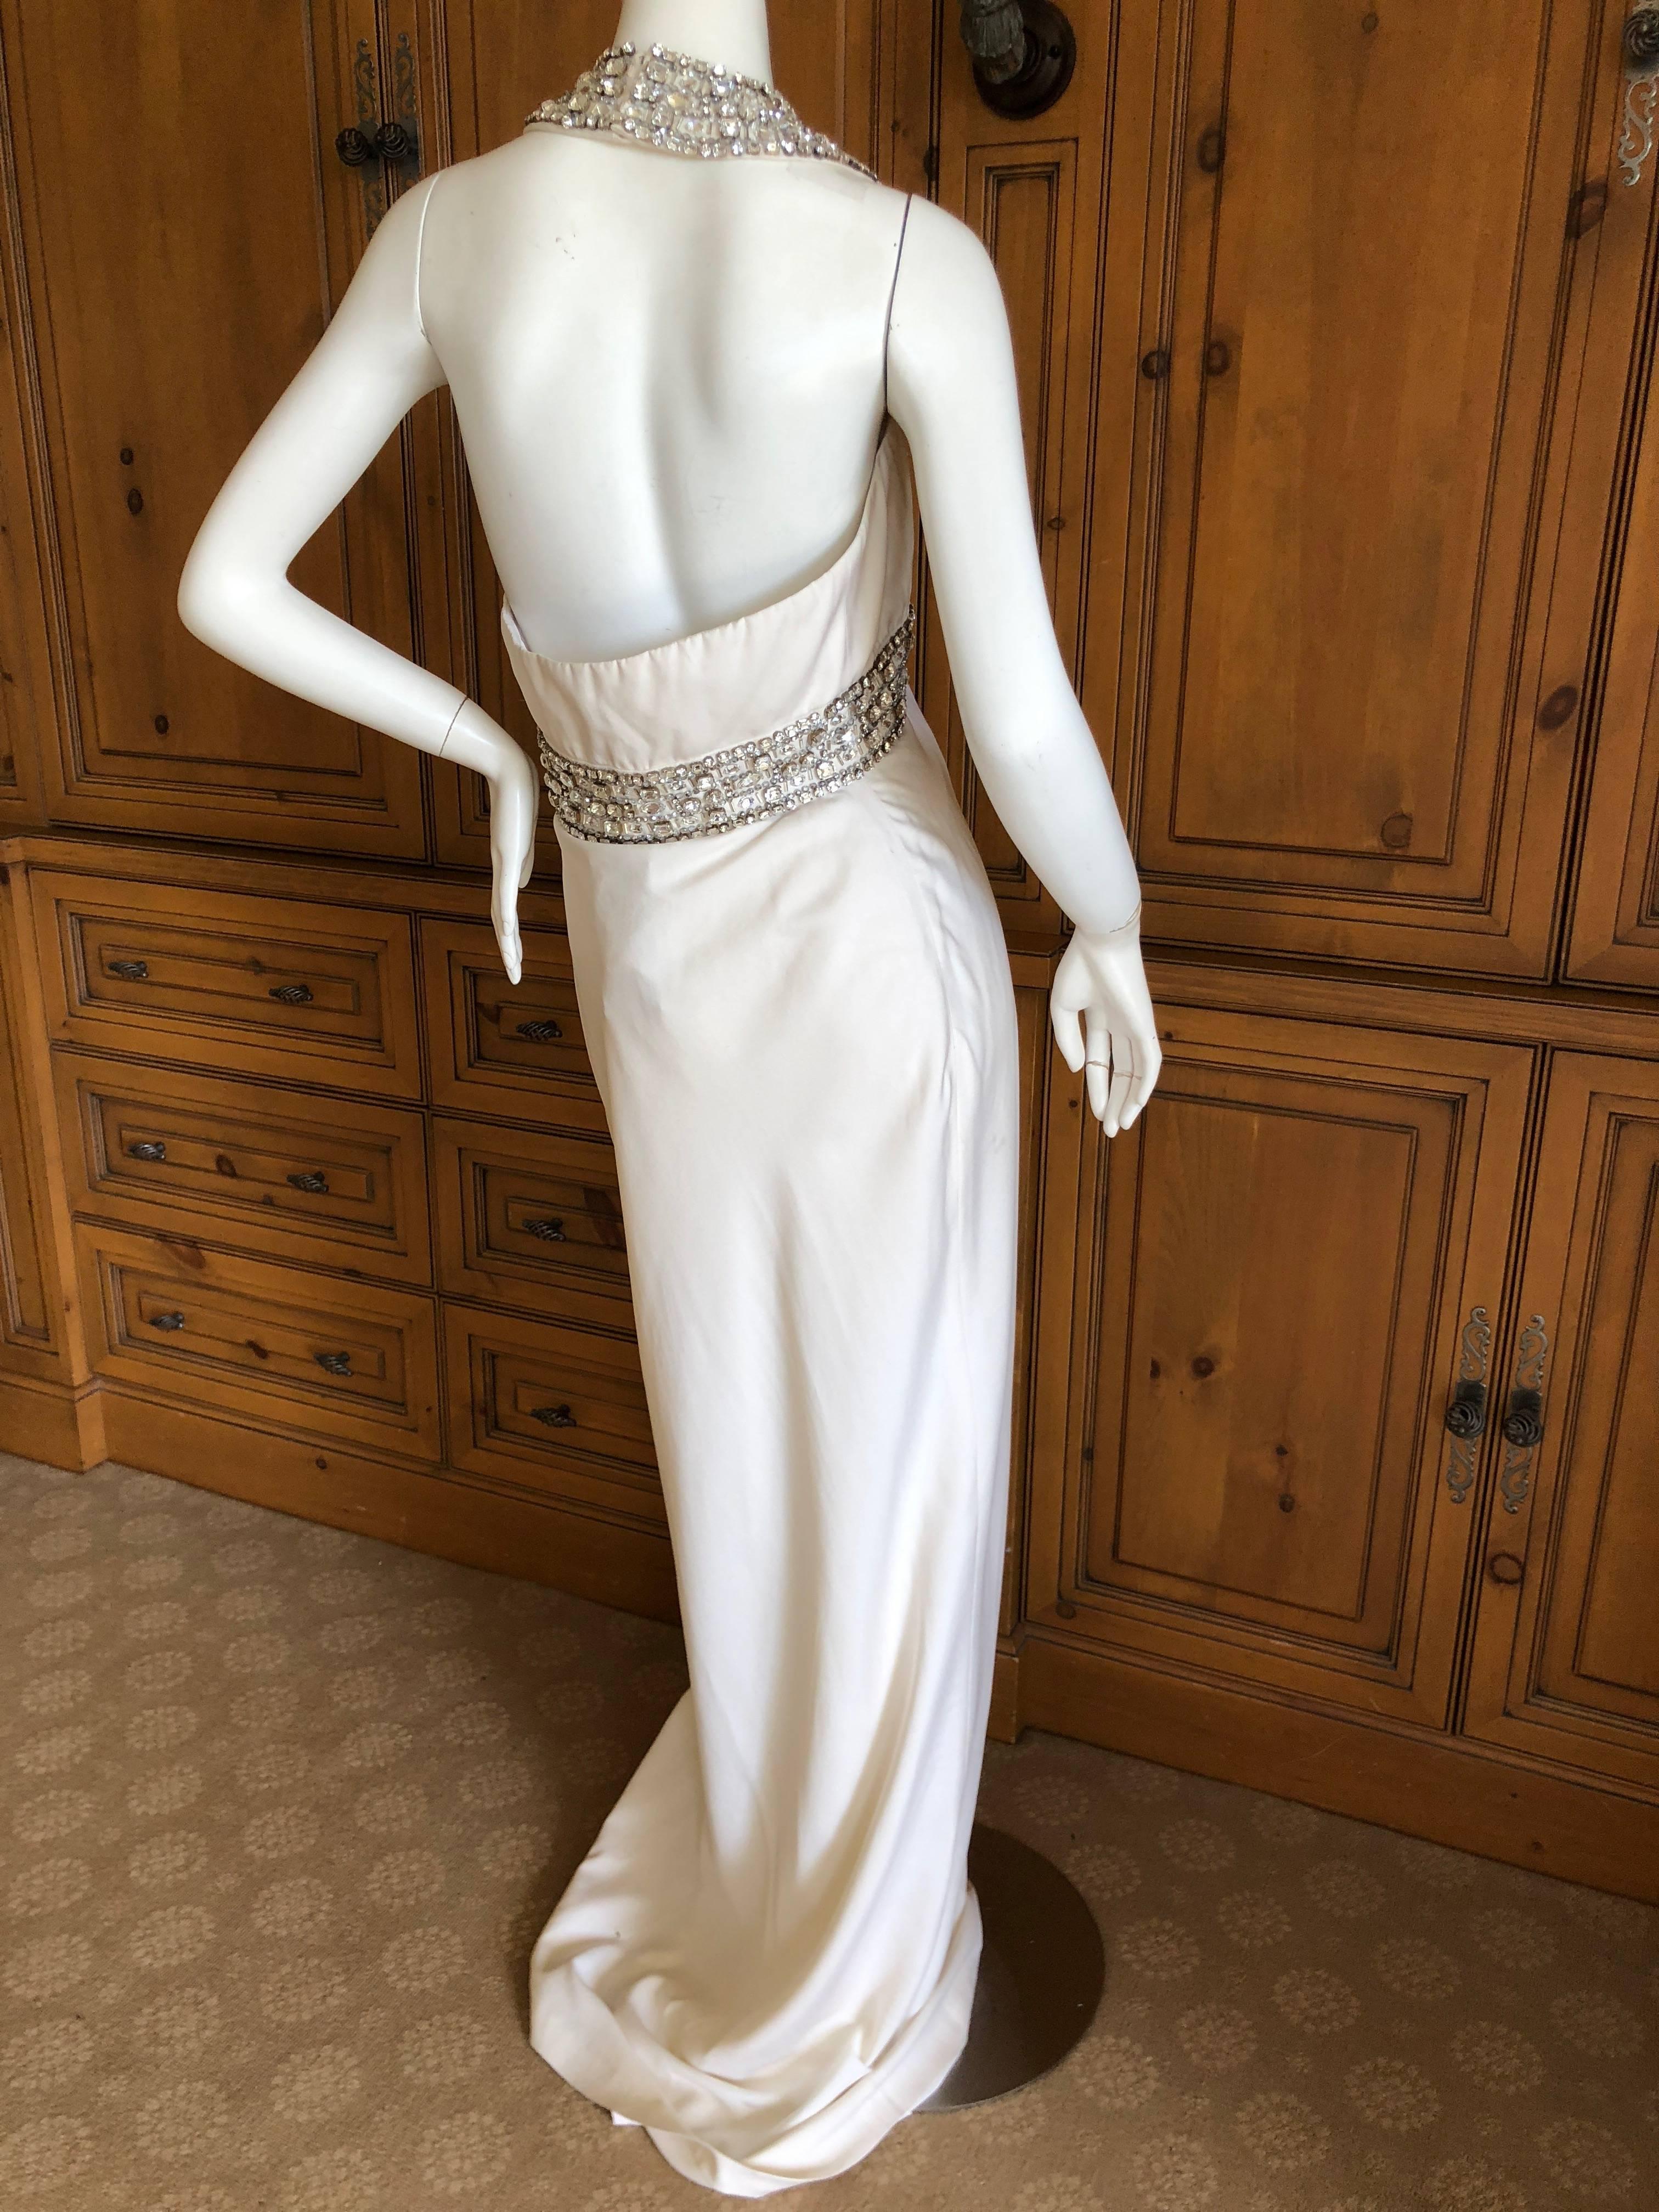 Azzaro Low Cut Ivory Dress with Bold Crystal Jewel Details For Sale 5